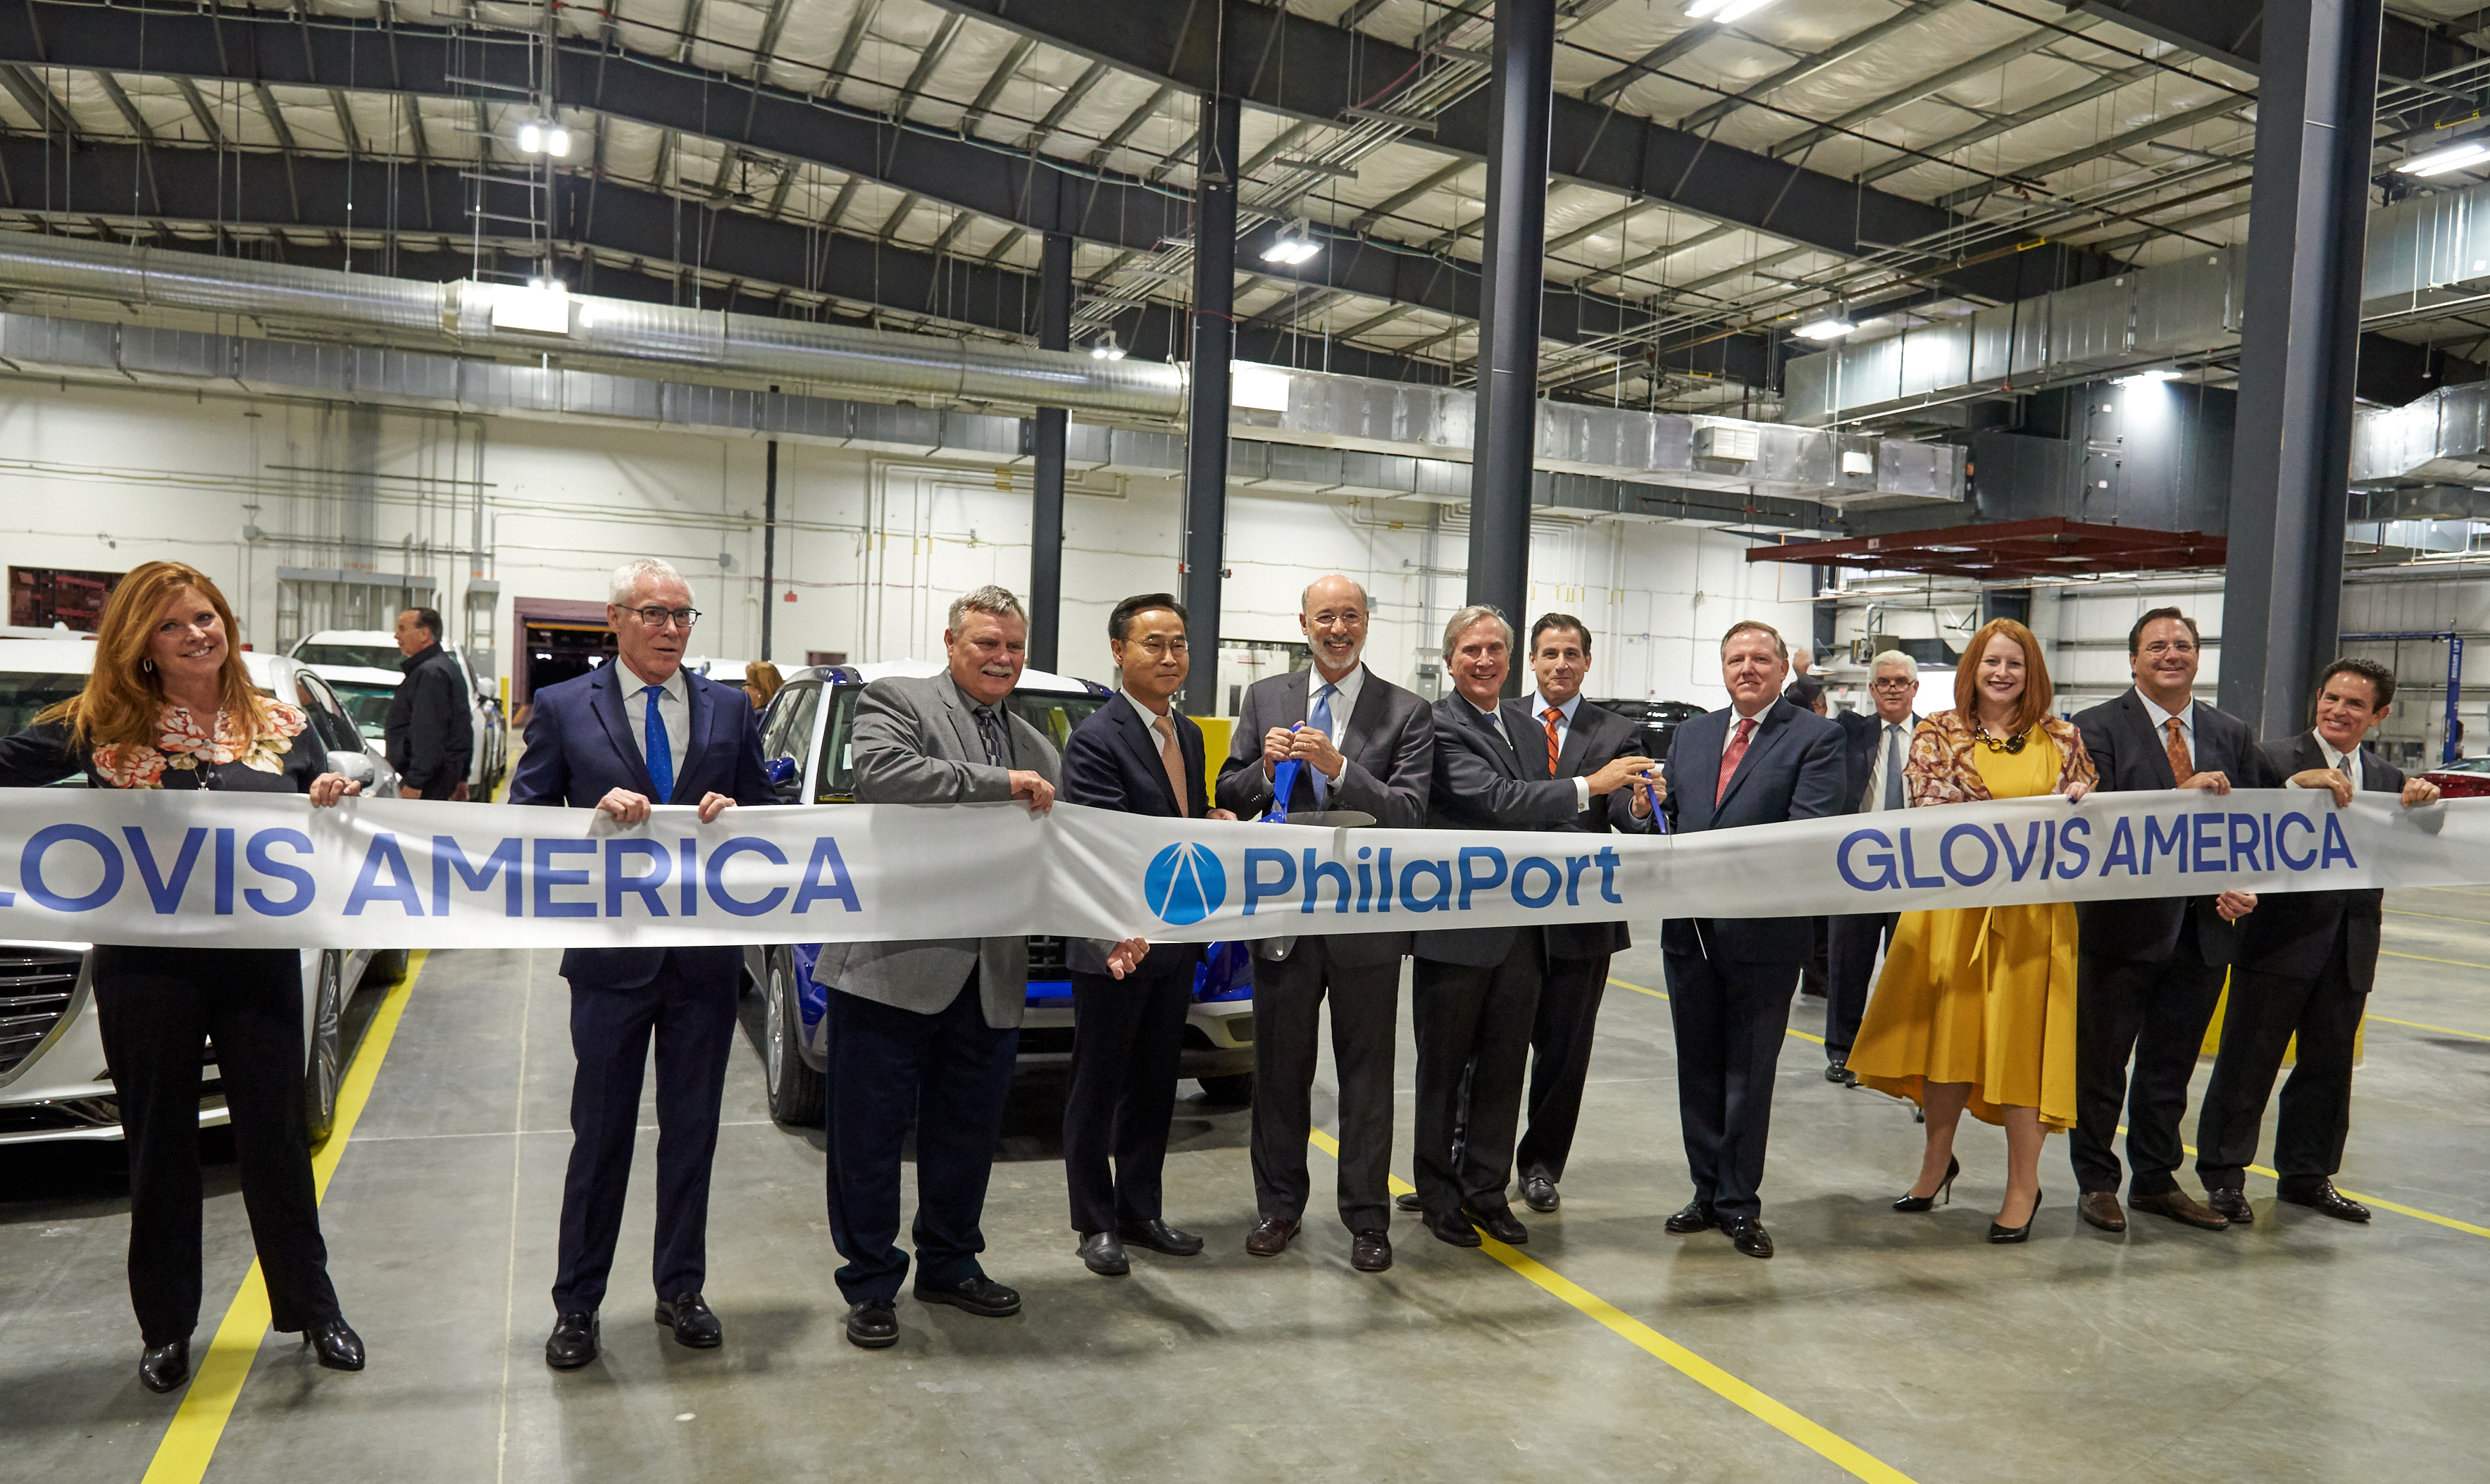 PhilaPort and partners Glovis America, Inc. Celebrate Official Opening of the Southport Auto Terminal and Vehicle Processing Center